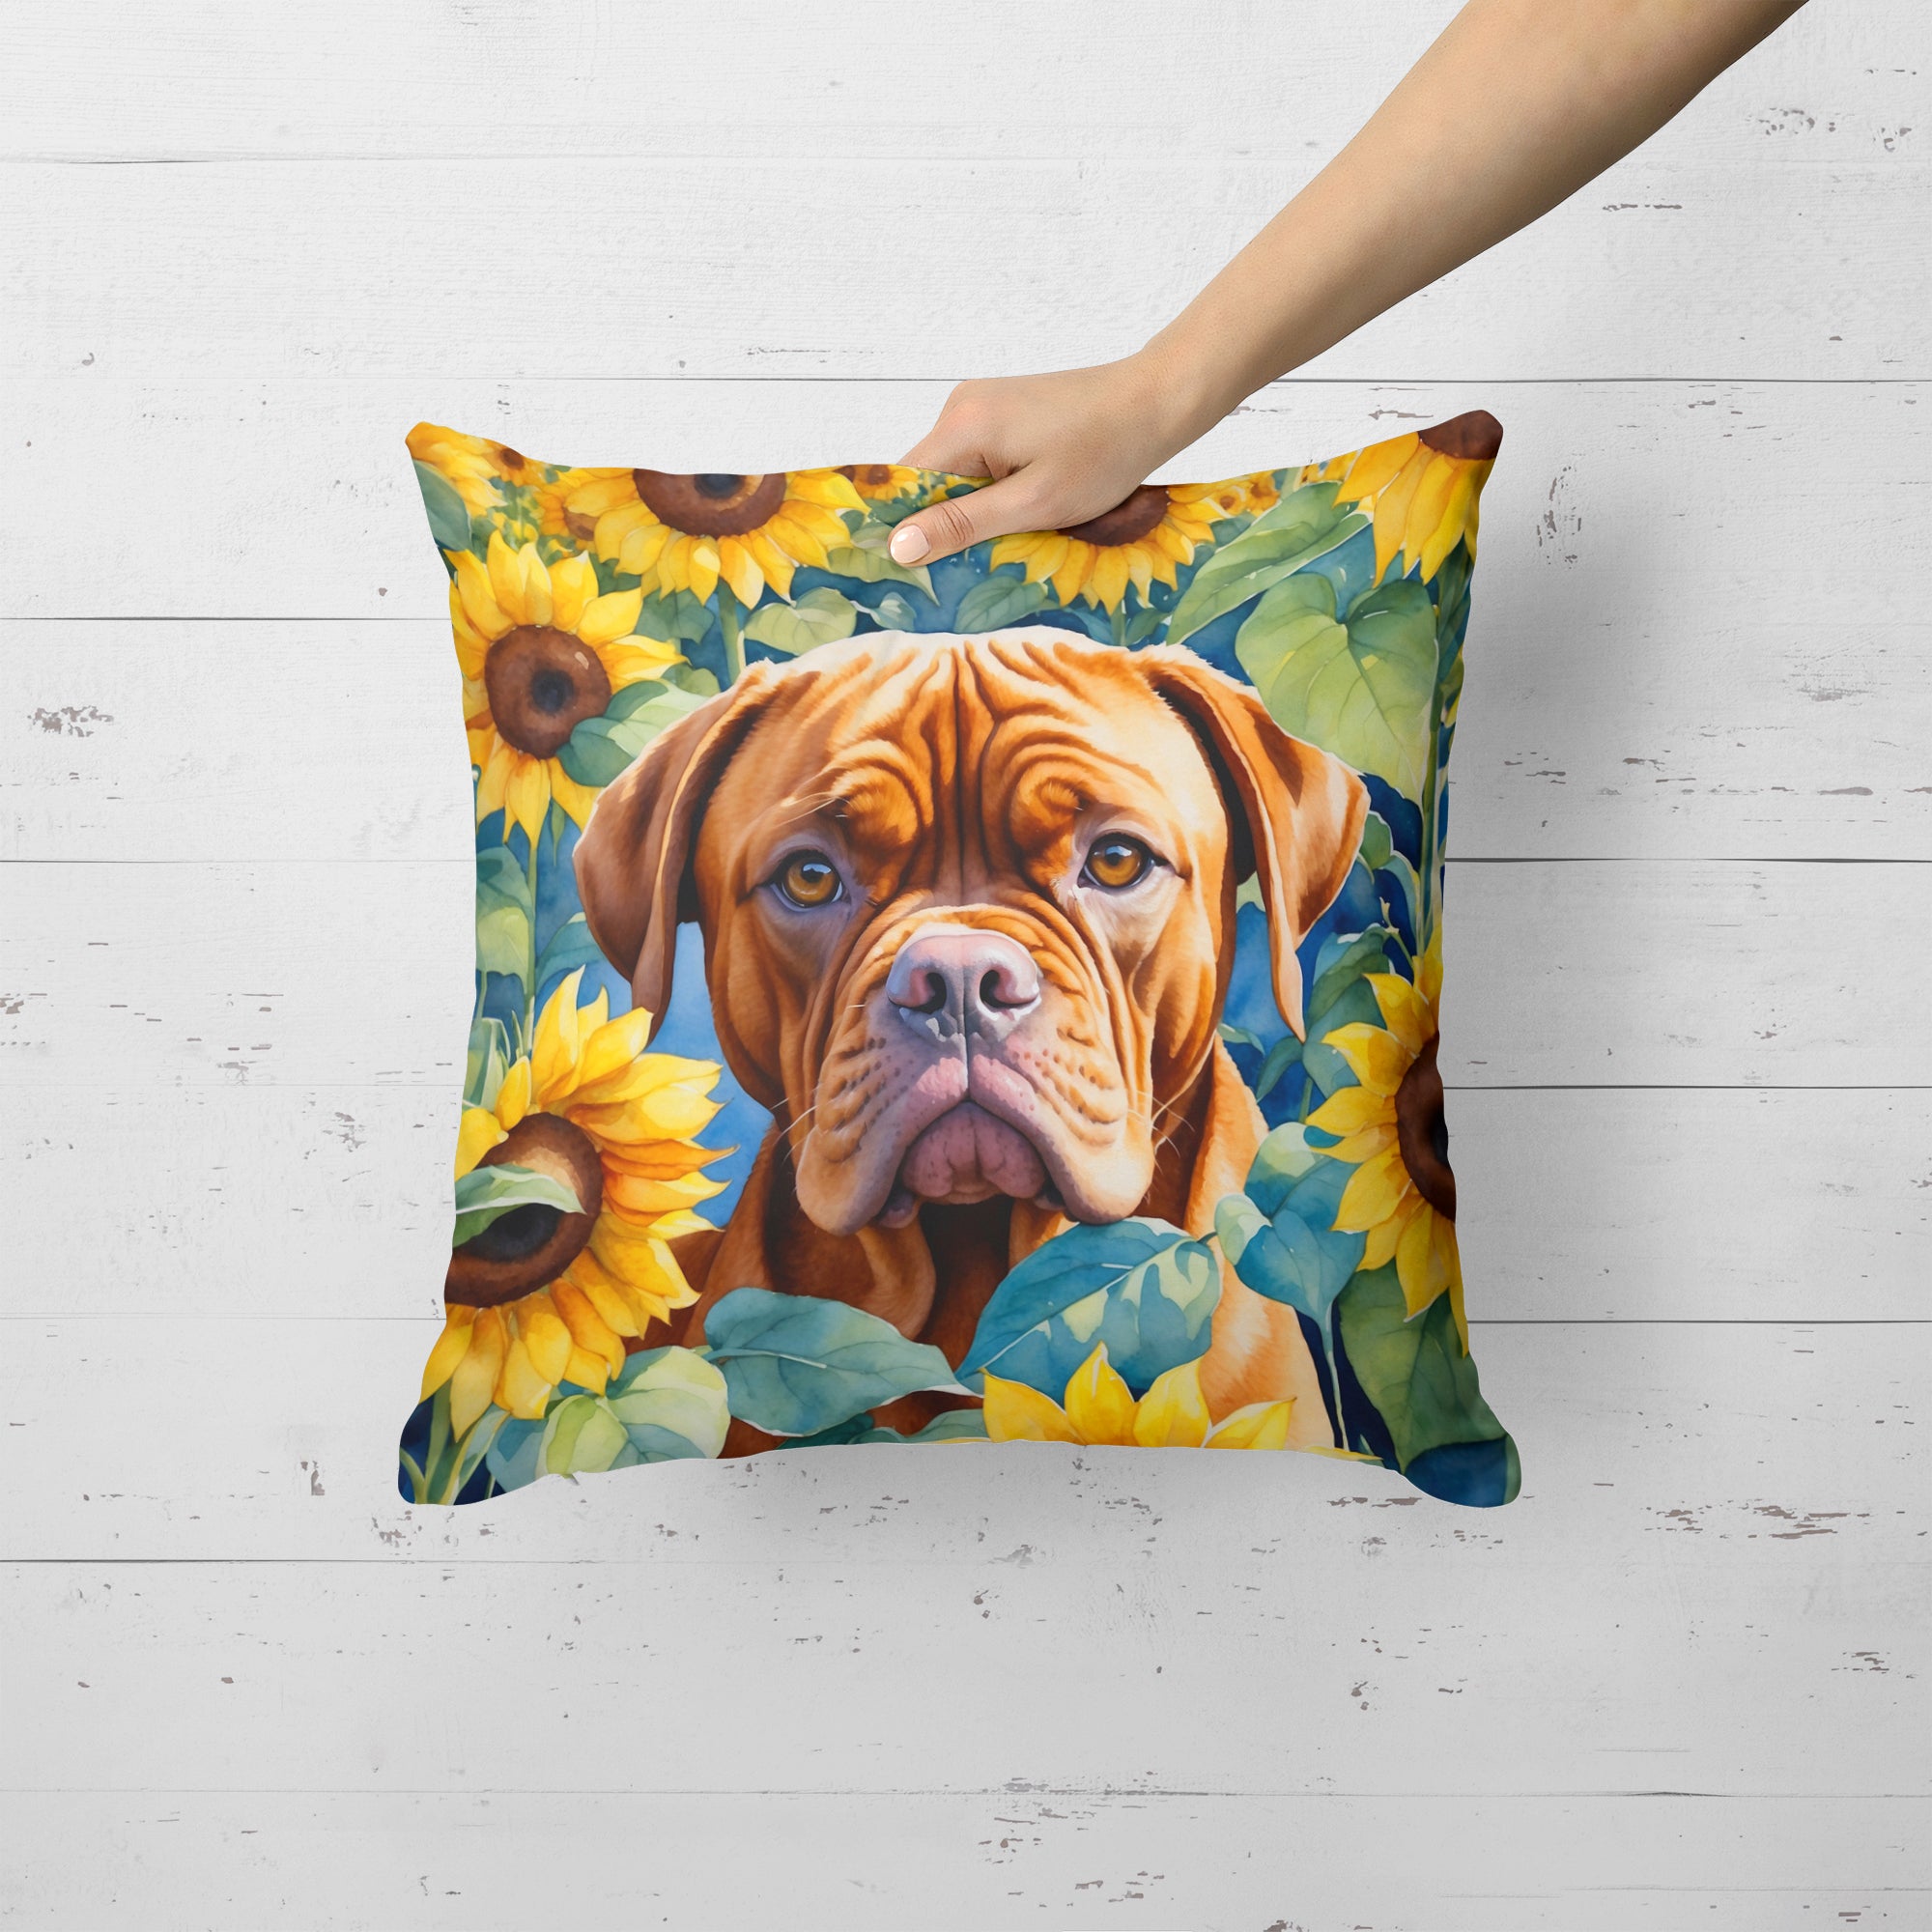 Buy this Dogue de Bordeaux in Sunflowers Throw Pillow